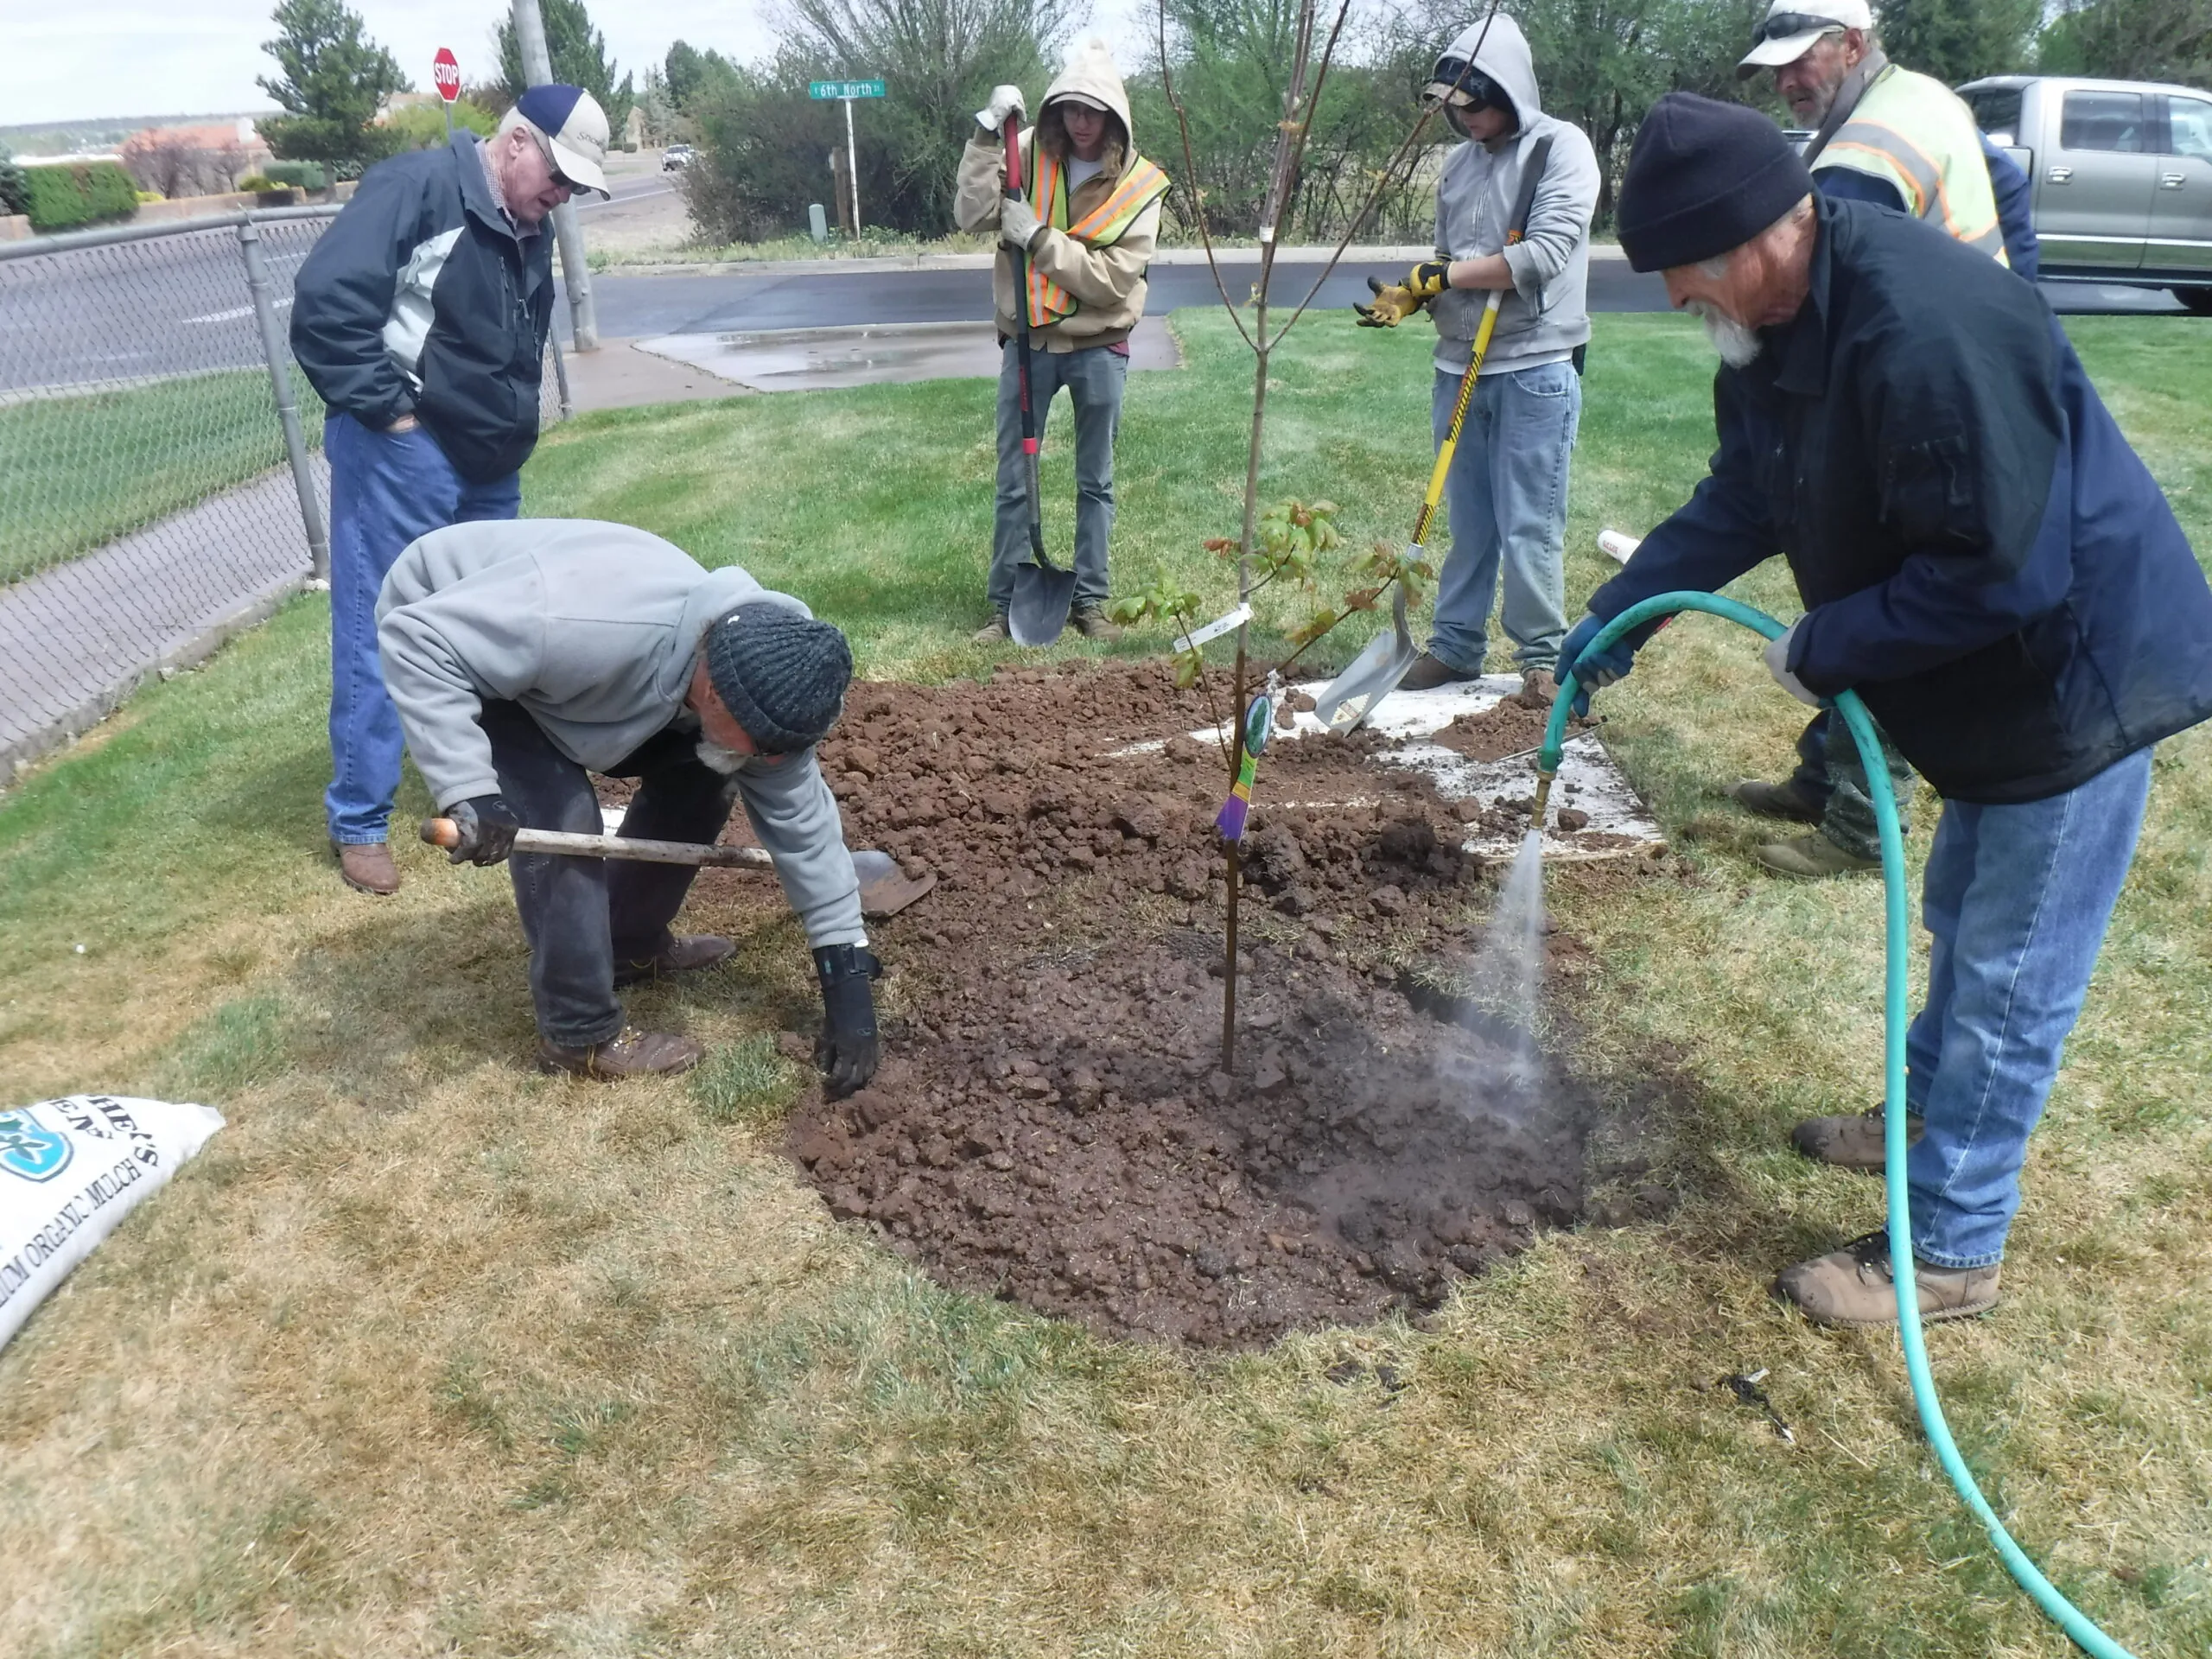 Parks employees, retired arborist Bruce Mighton, and Vice Mayor and Tree Board Chairman Kerry Ballard participate in planting a tree at Pioneer Park for Arbor Day.